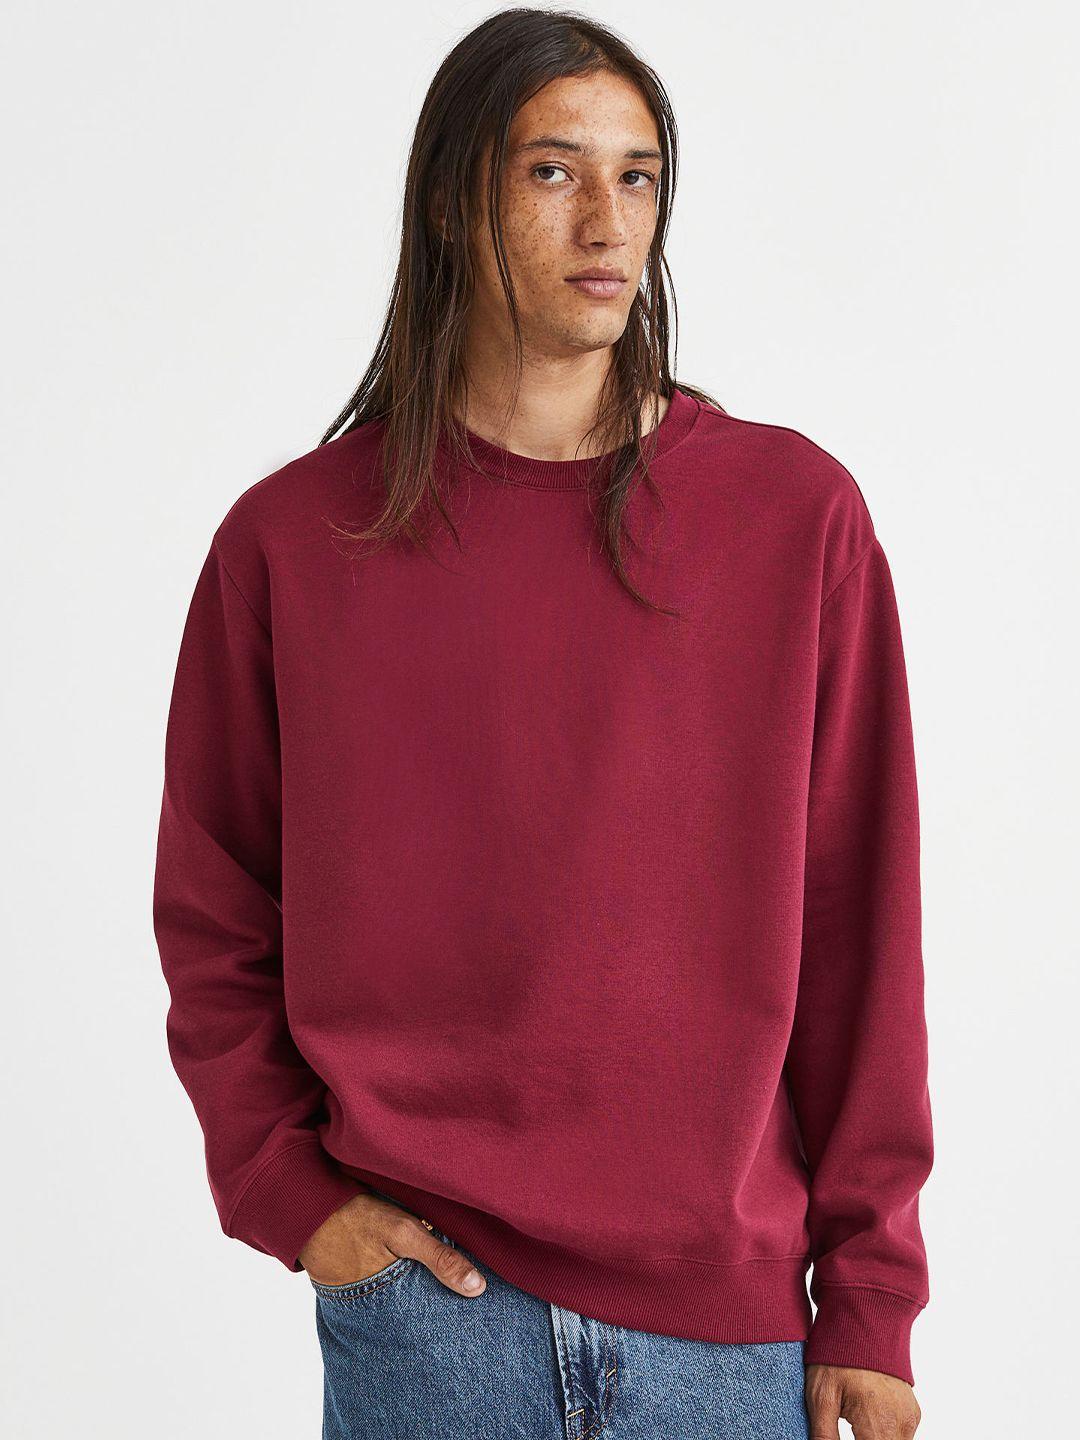 h&m relaxed fit sweatshirt